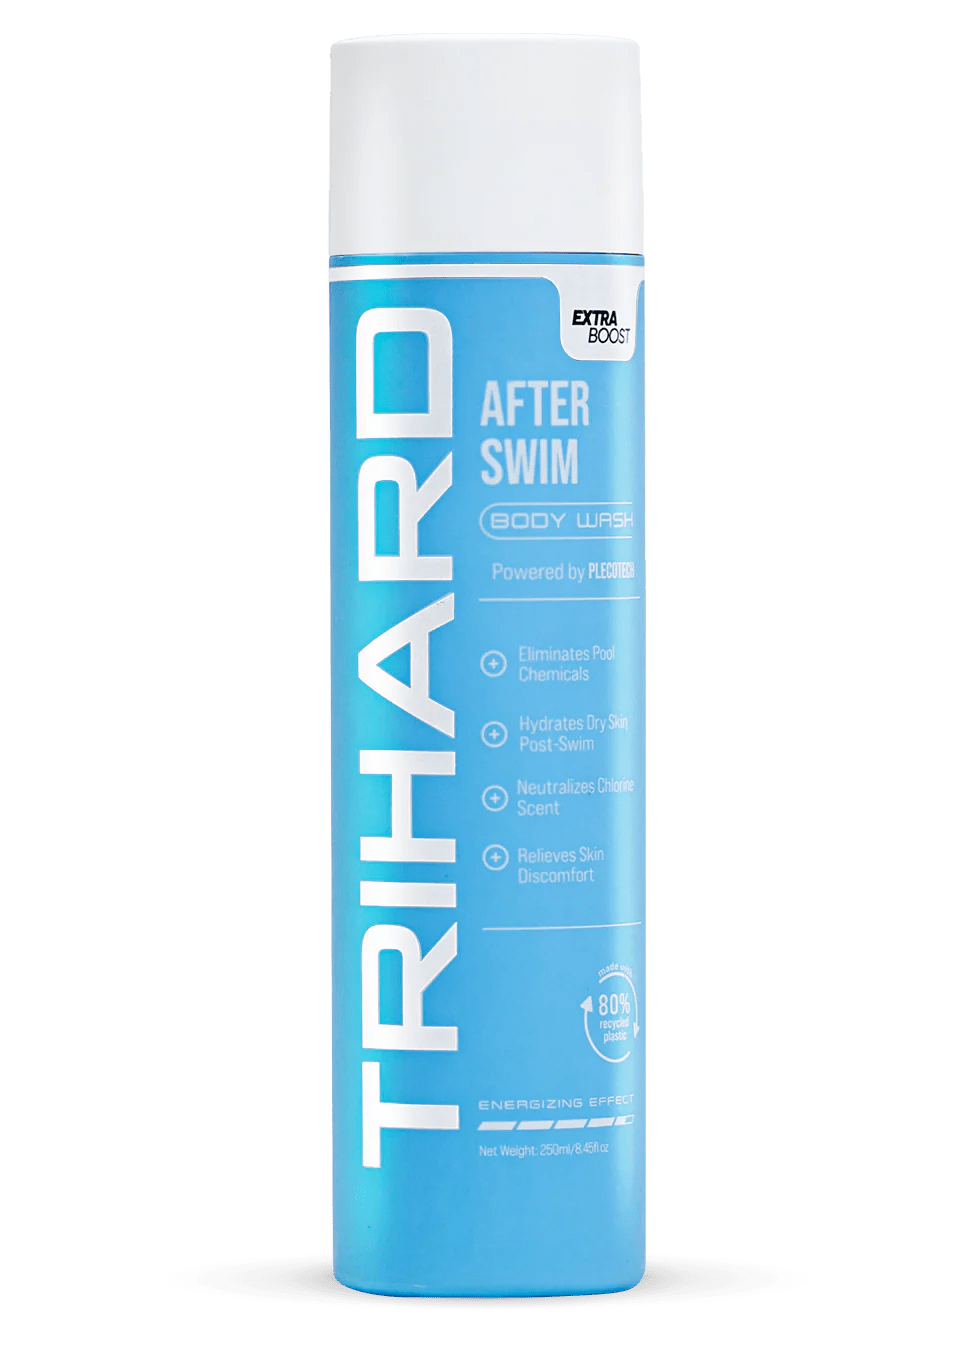 TriHard After Swim Body Wash Extra Boost - Element Tri & Bicycle Works